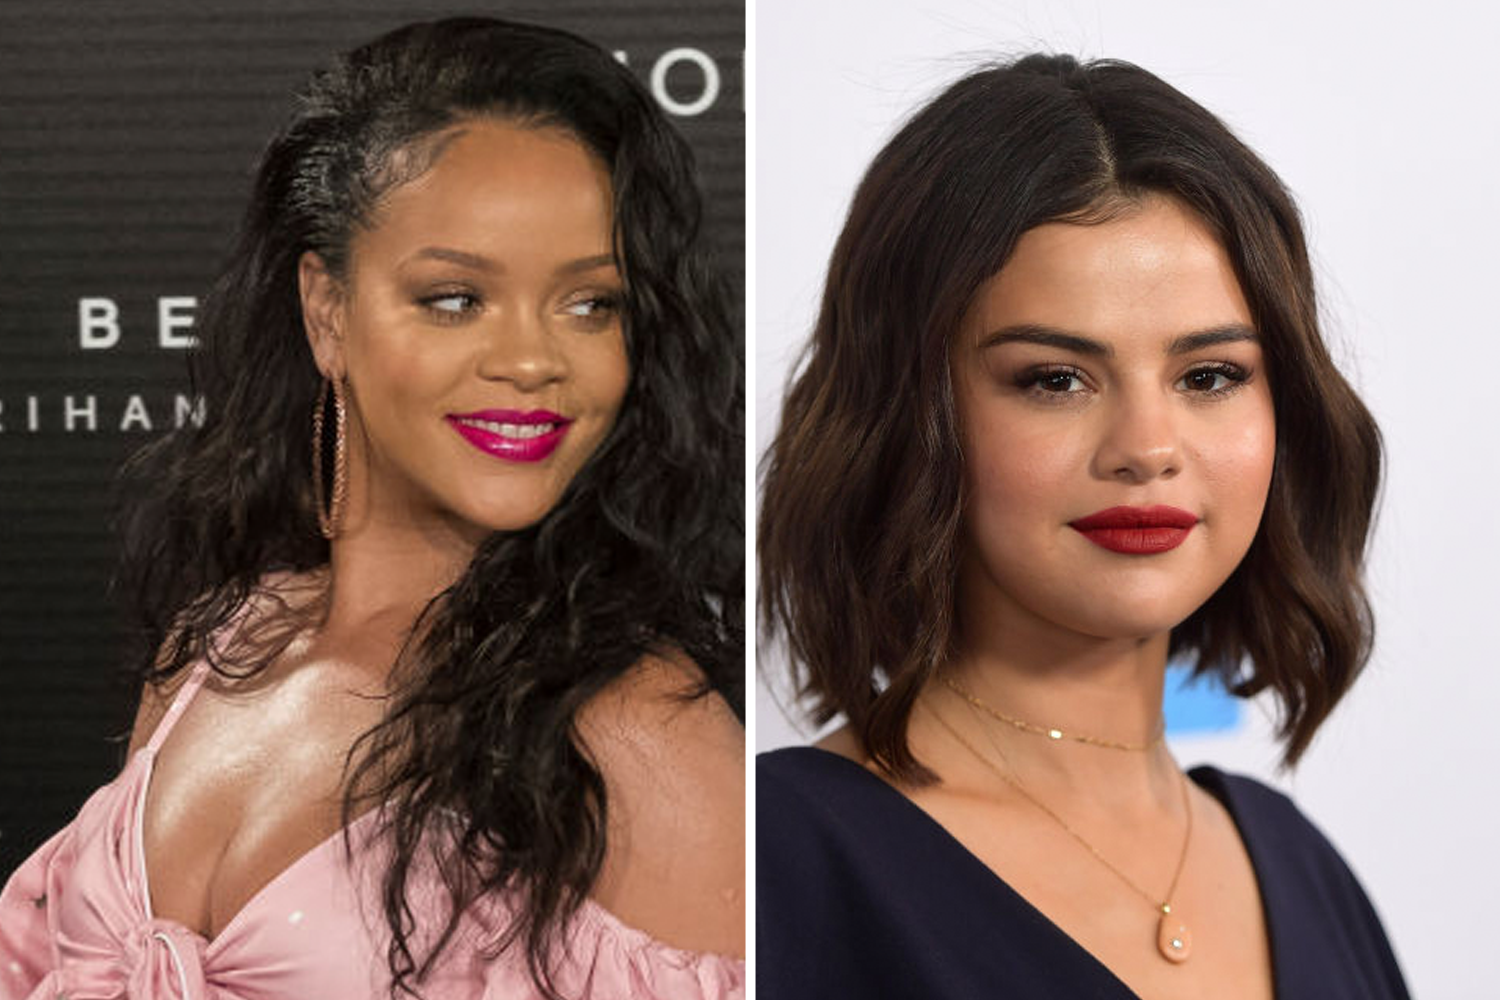 Quiz: How Well Do You Know Celebrity's Ages?